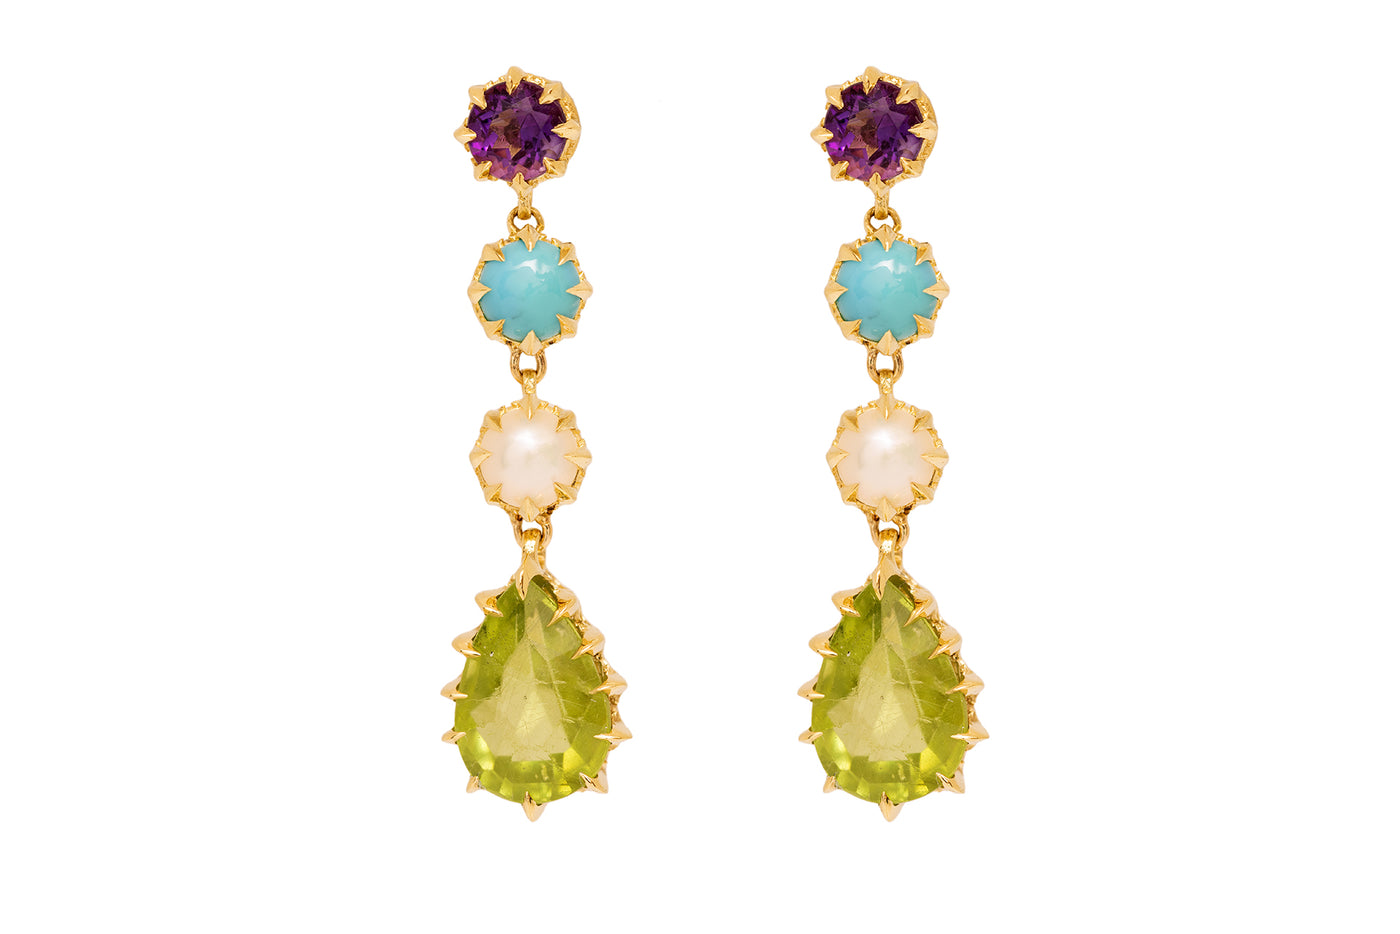 Pink Sapphire, Turquoise, Pearl, and Peridot Victorian Drop Earrings